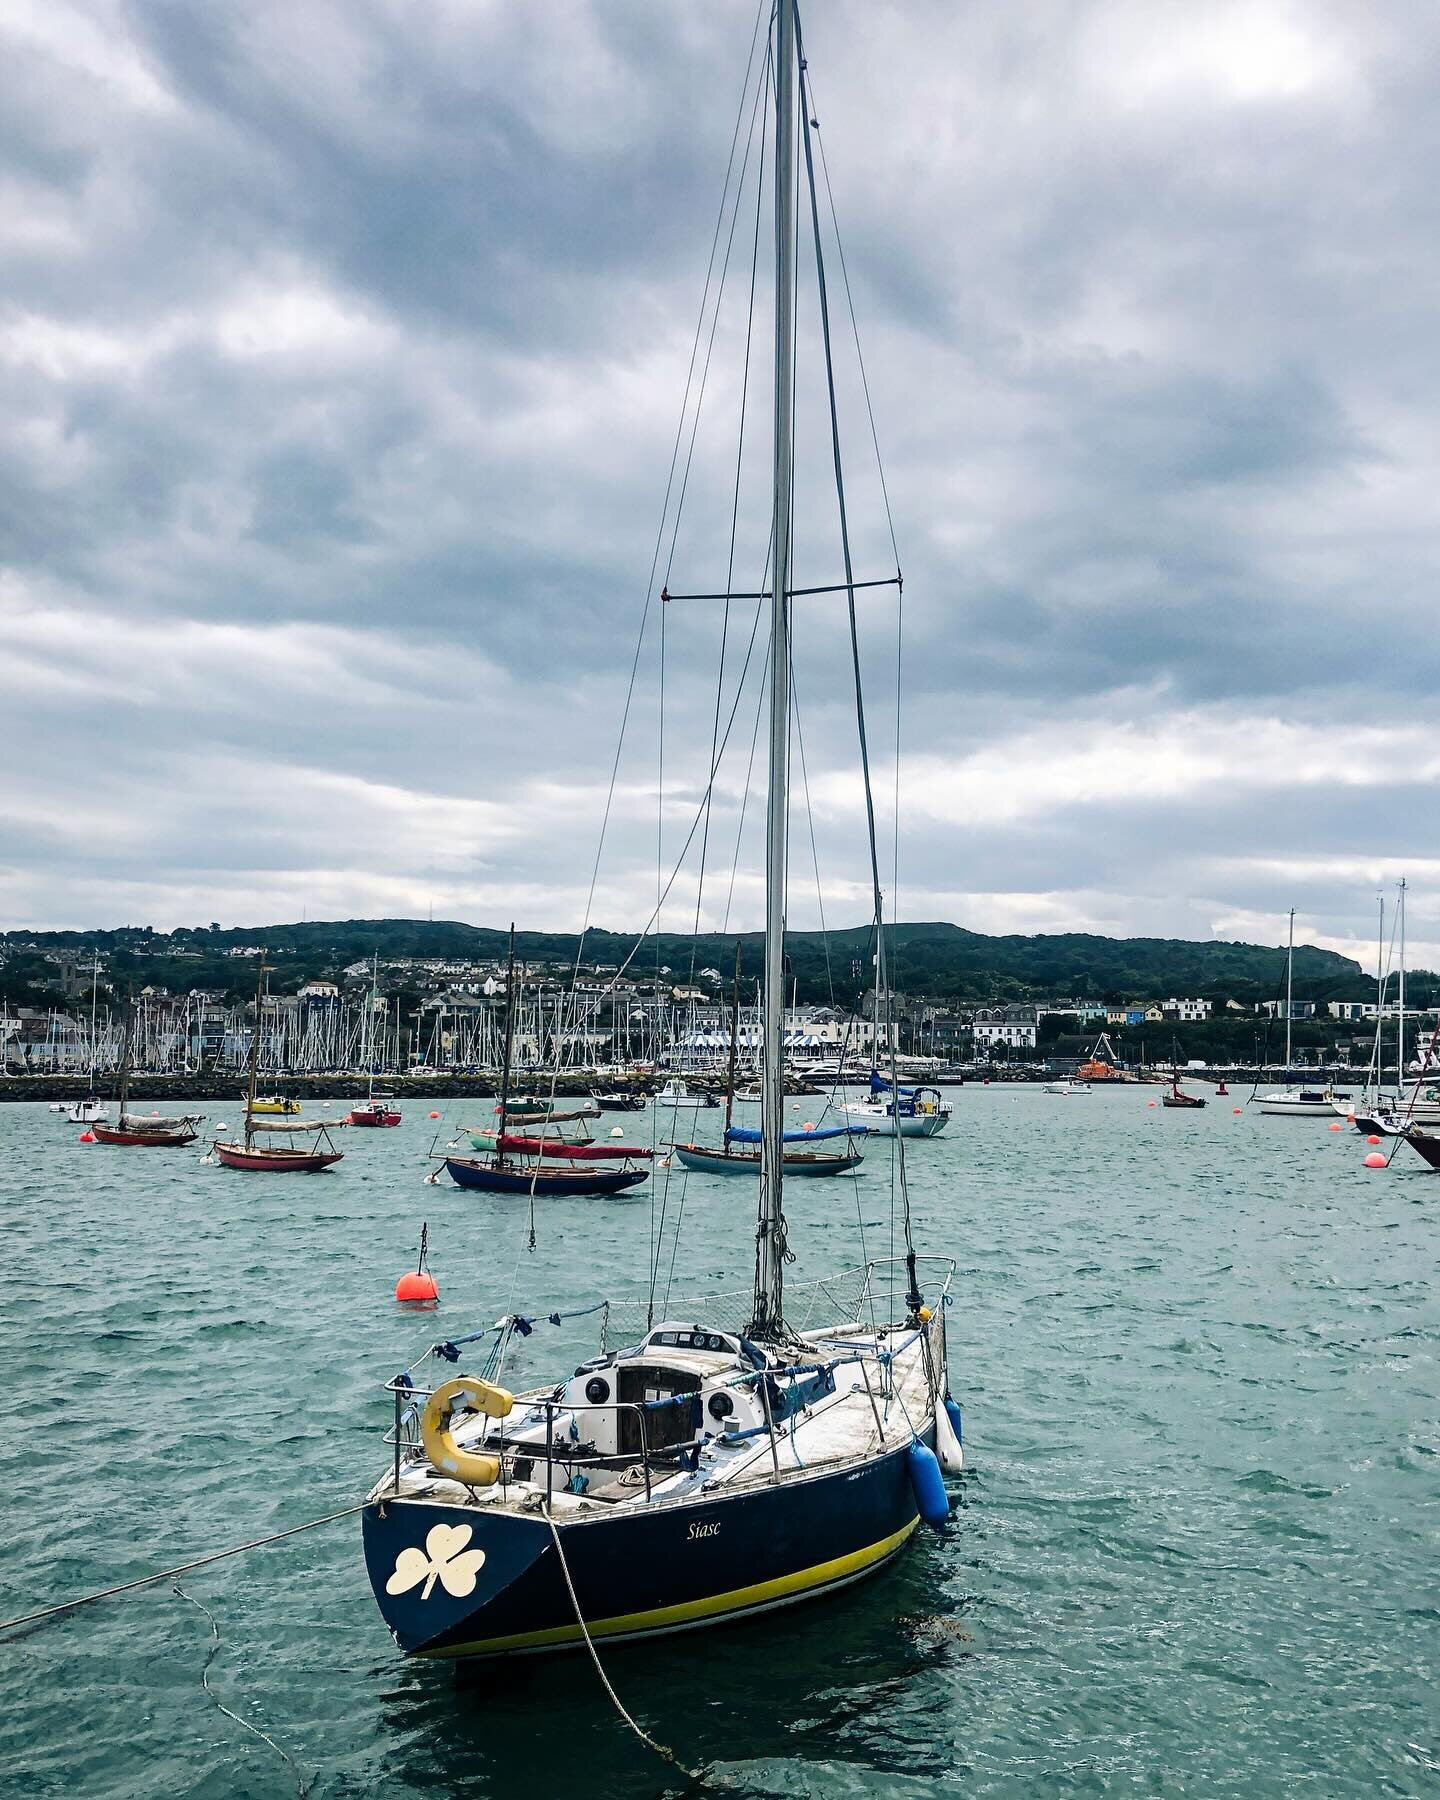 📍Howth, Ireland

Ventured away from Dublin for a day to a coastal town called Howth. Grabbed some pea soup and clam chowder on another gloomy day in Ireland. 

#travel #travelblog #vacation #photography #holiday #viator #streetphotography #streetsty